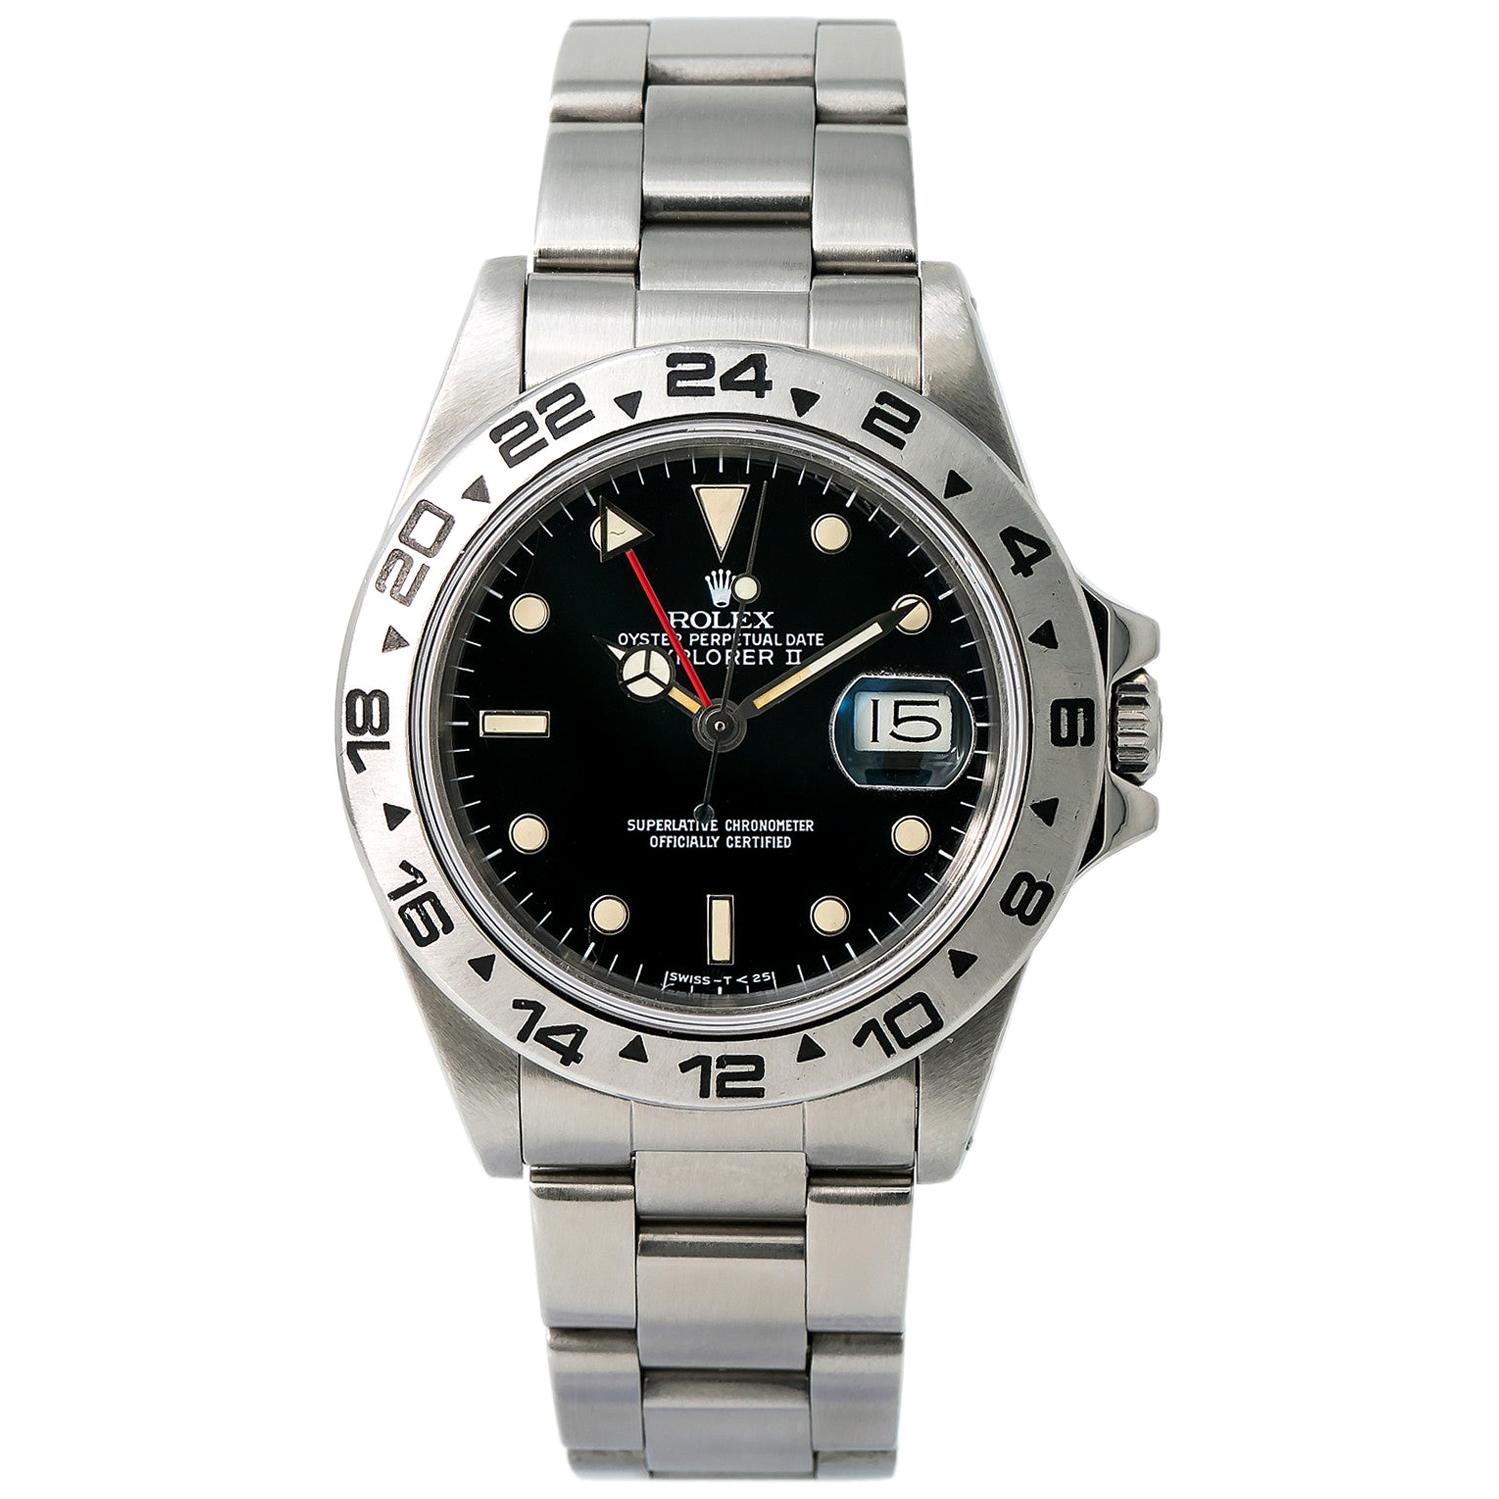 Rolex Explorer II 16550, White Dial, Certified and Warranty For Sale